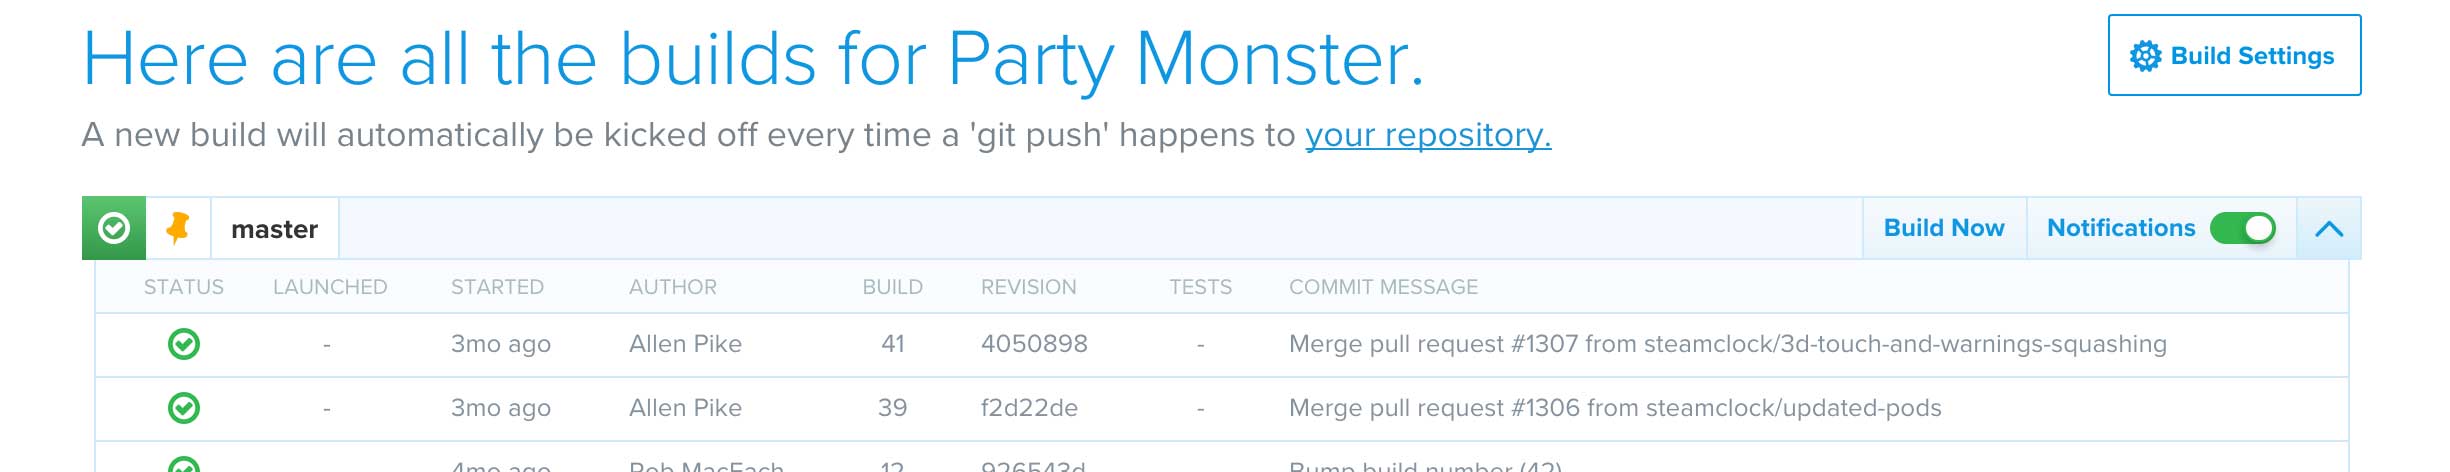 Screenshot of BuddyBuild's UI showing the most recent builds for Party Monster